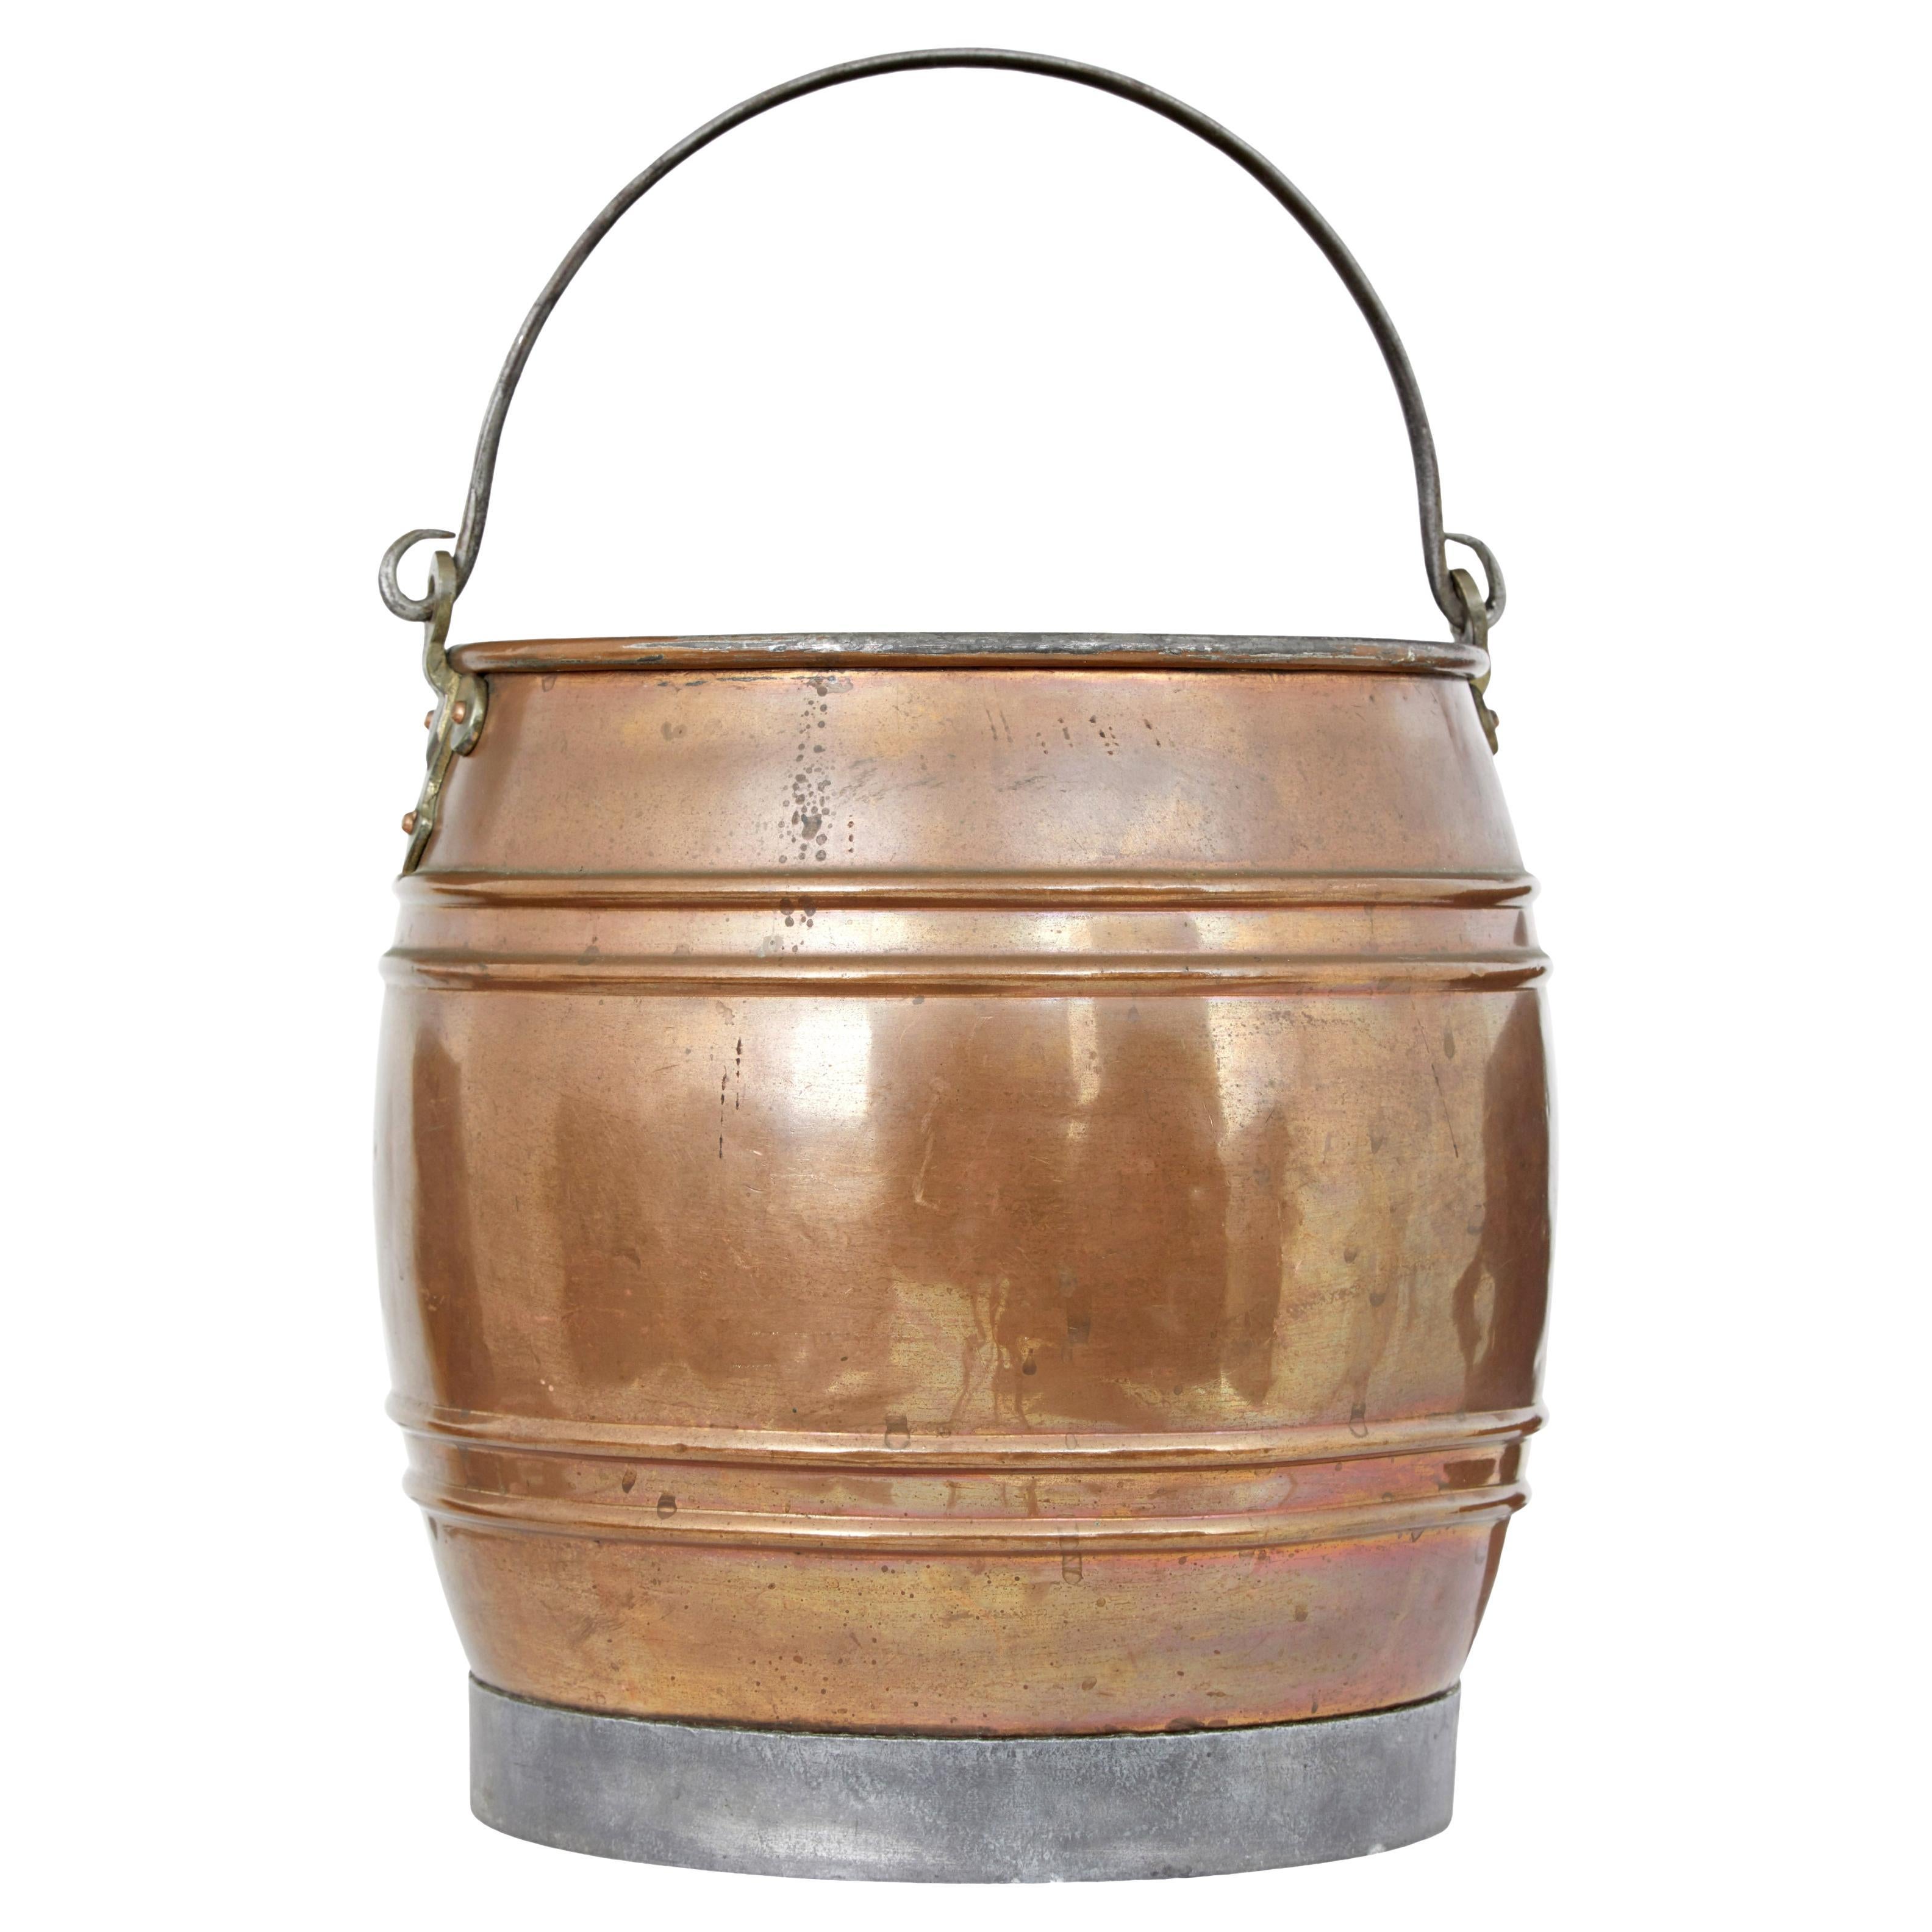 Late 19th century arts and crafts copper bucket For Sale